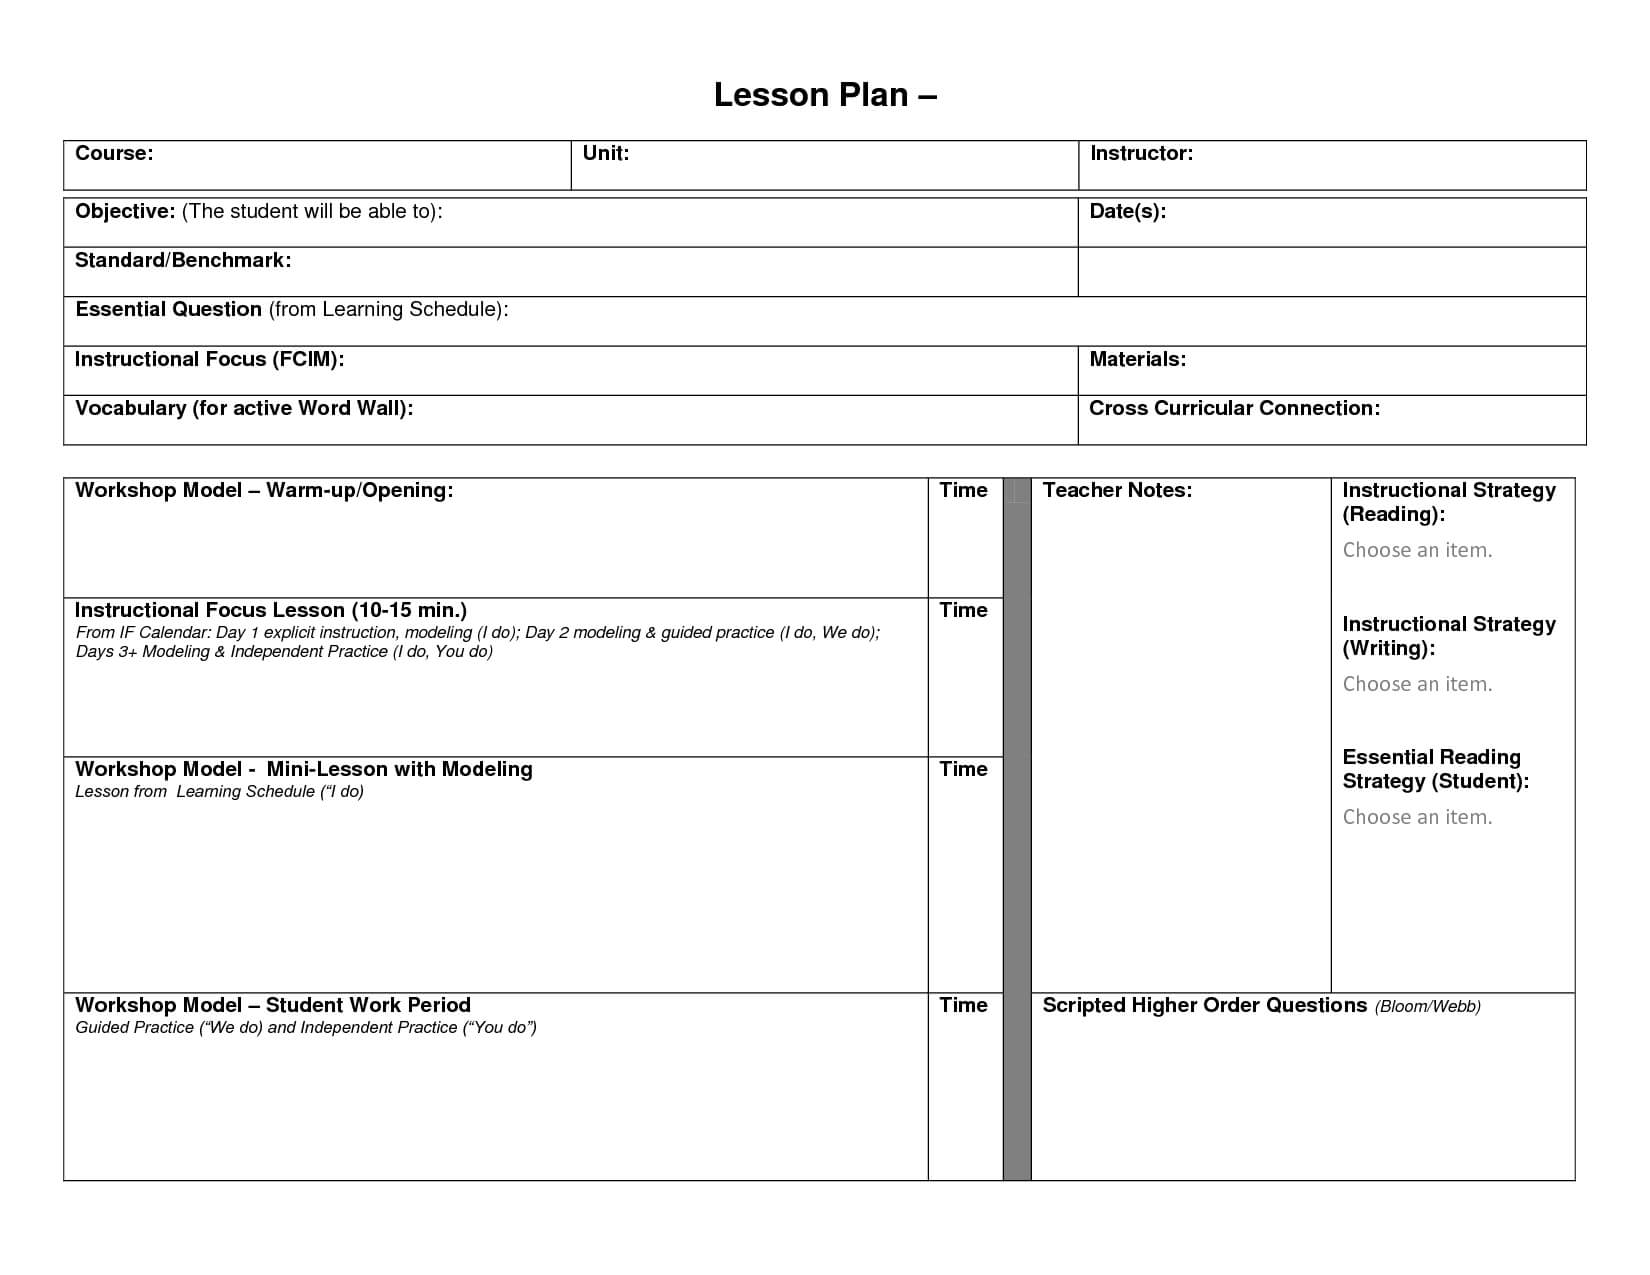 Blank Lesson Plan Format Template | Blank Lesson Template Within Blank Unit Lesson Plan Template